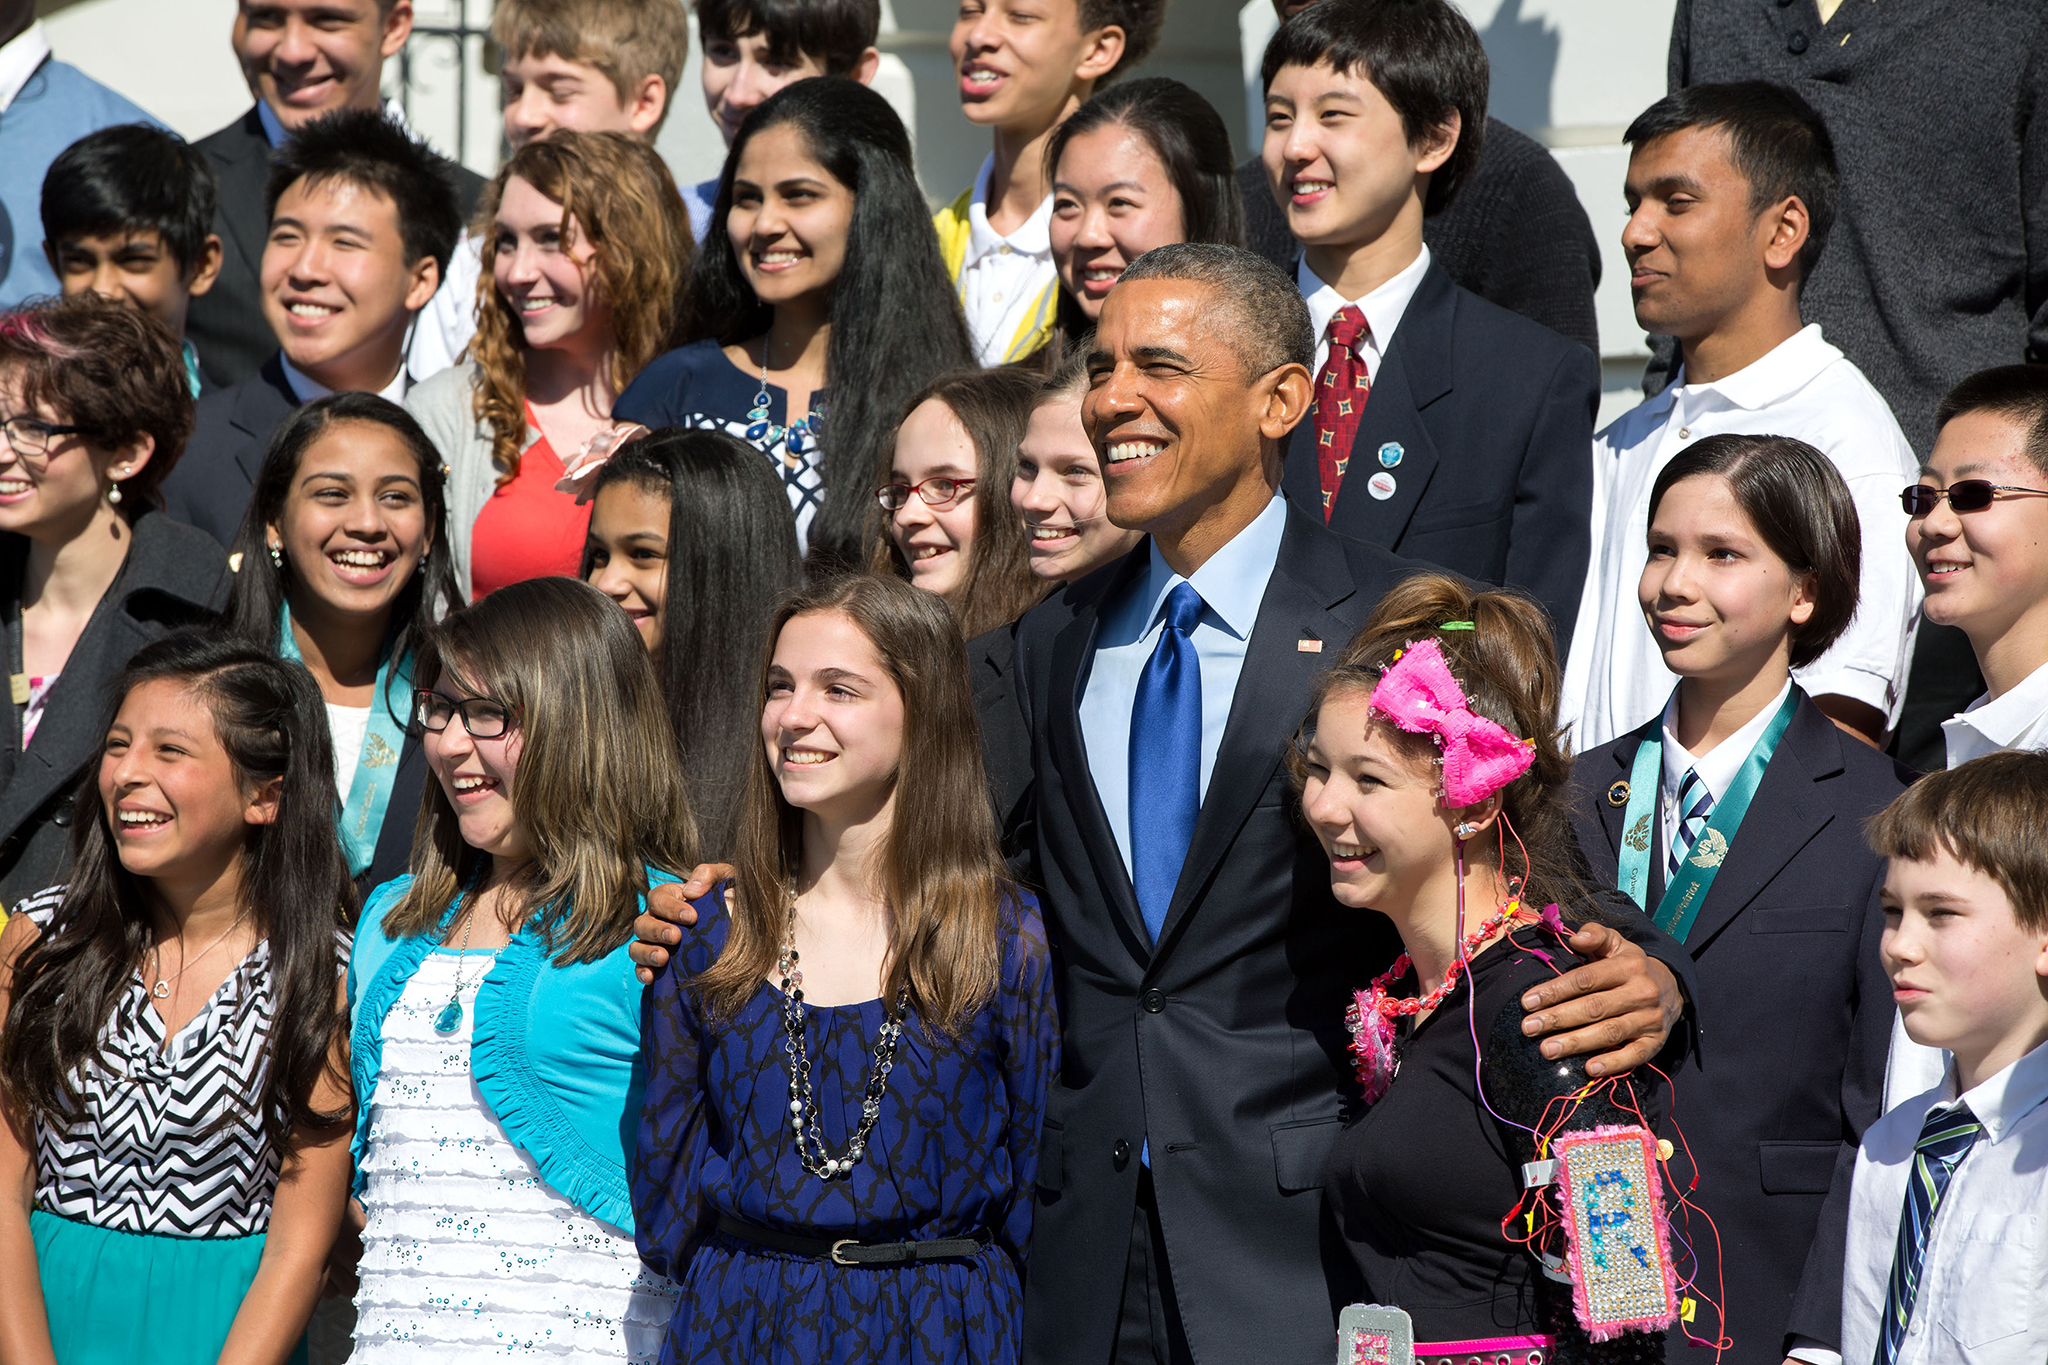 President Obama poses with White House Science Fair participants